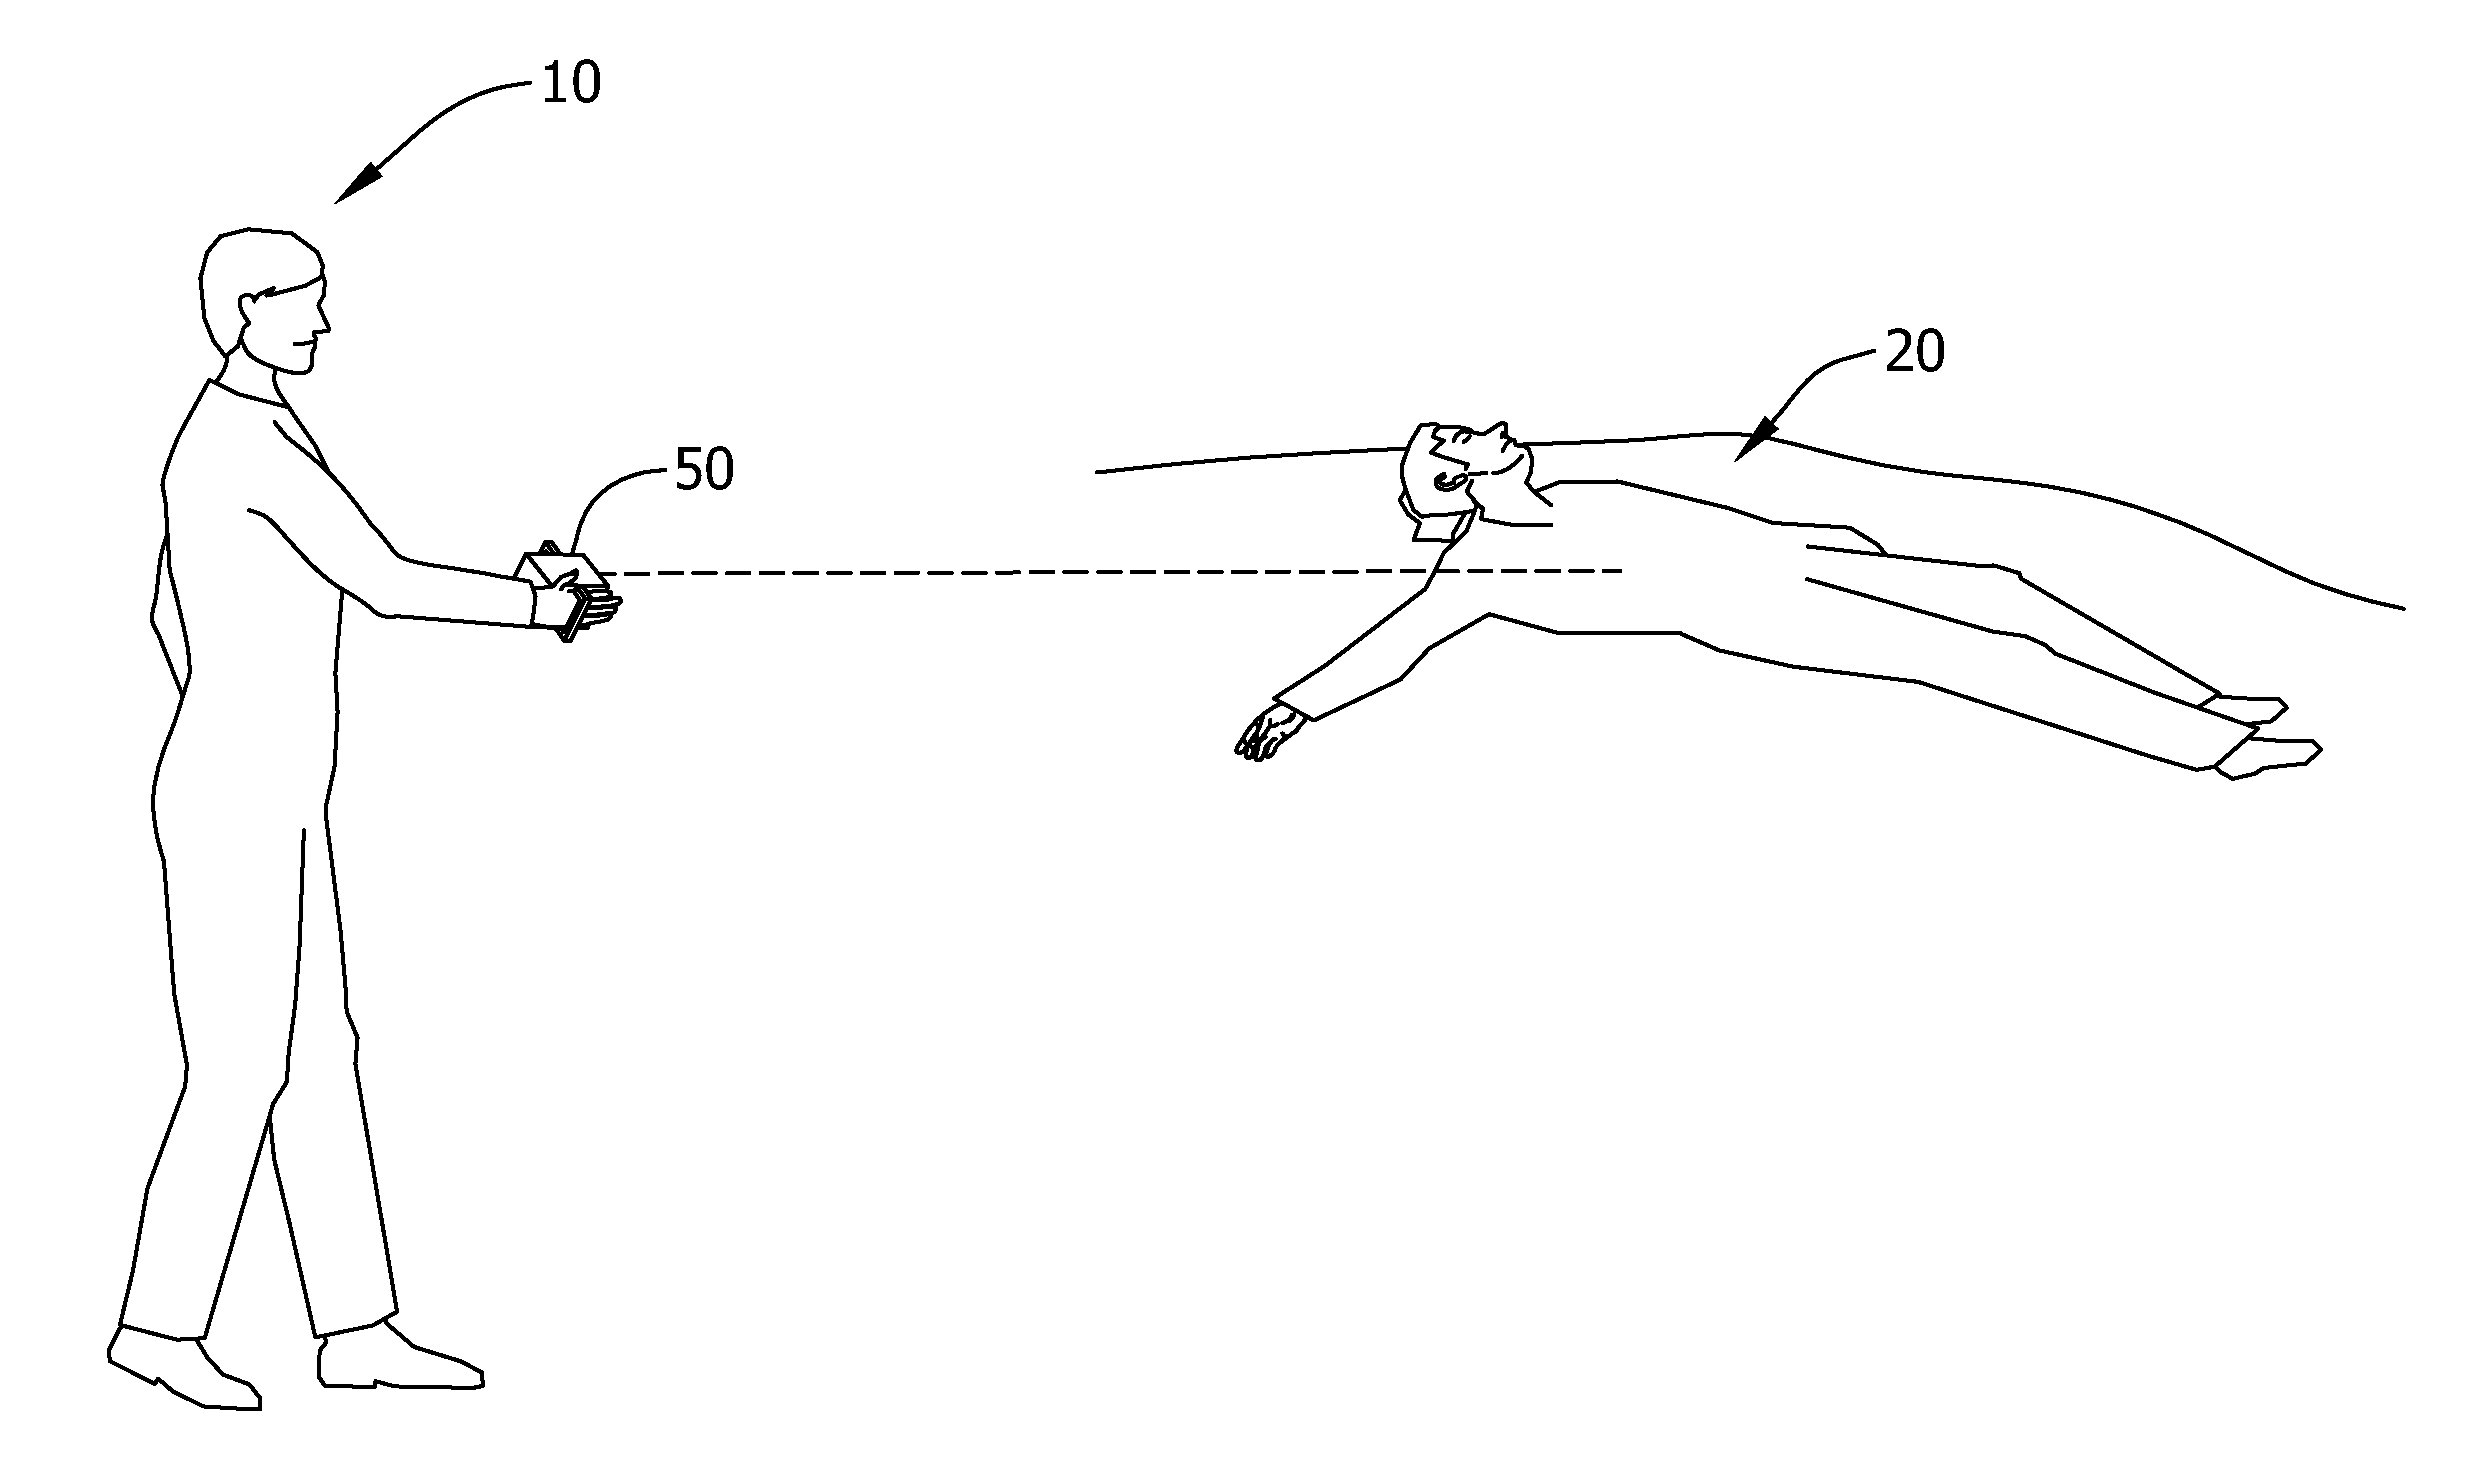 Systems and methods for non-contact biometric sensing